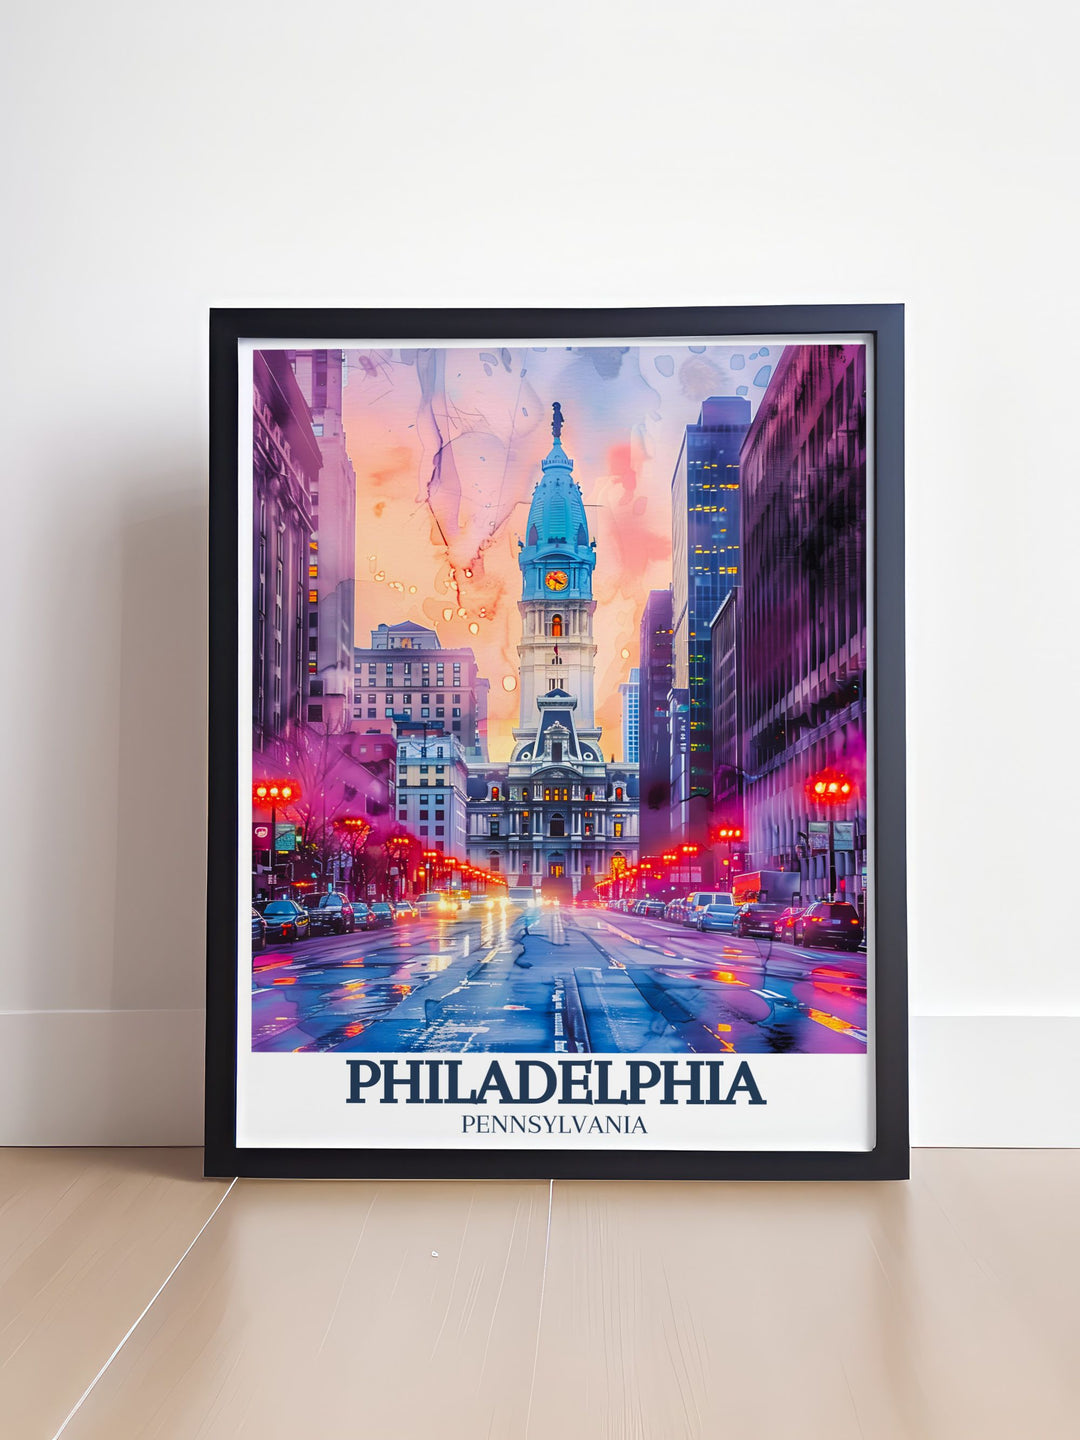 Exquisite Philadelphia travel print illustrating Independence National Historical Park Franklin Institute and City Hall an ideal gift for travelers and history buffs looking for unique wall art